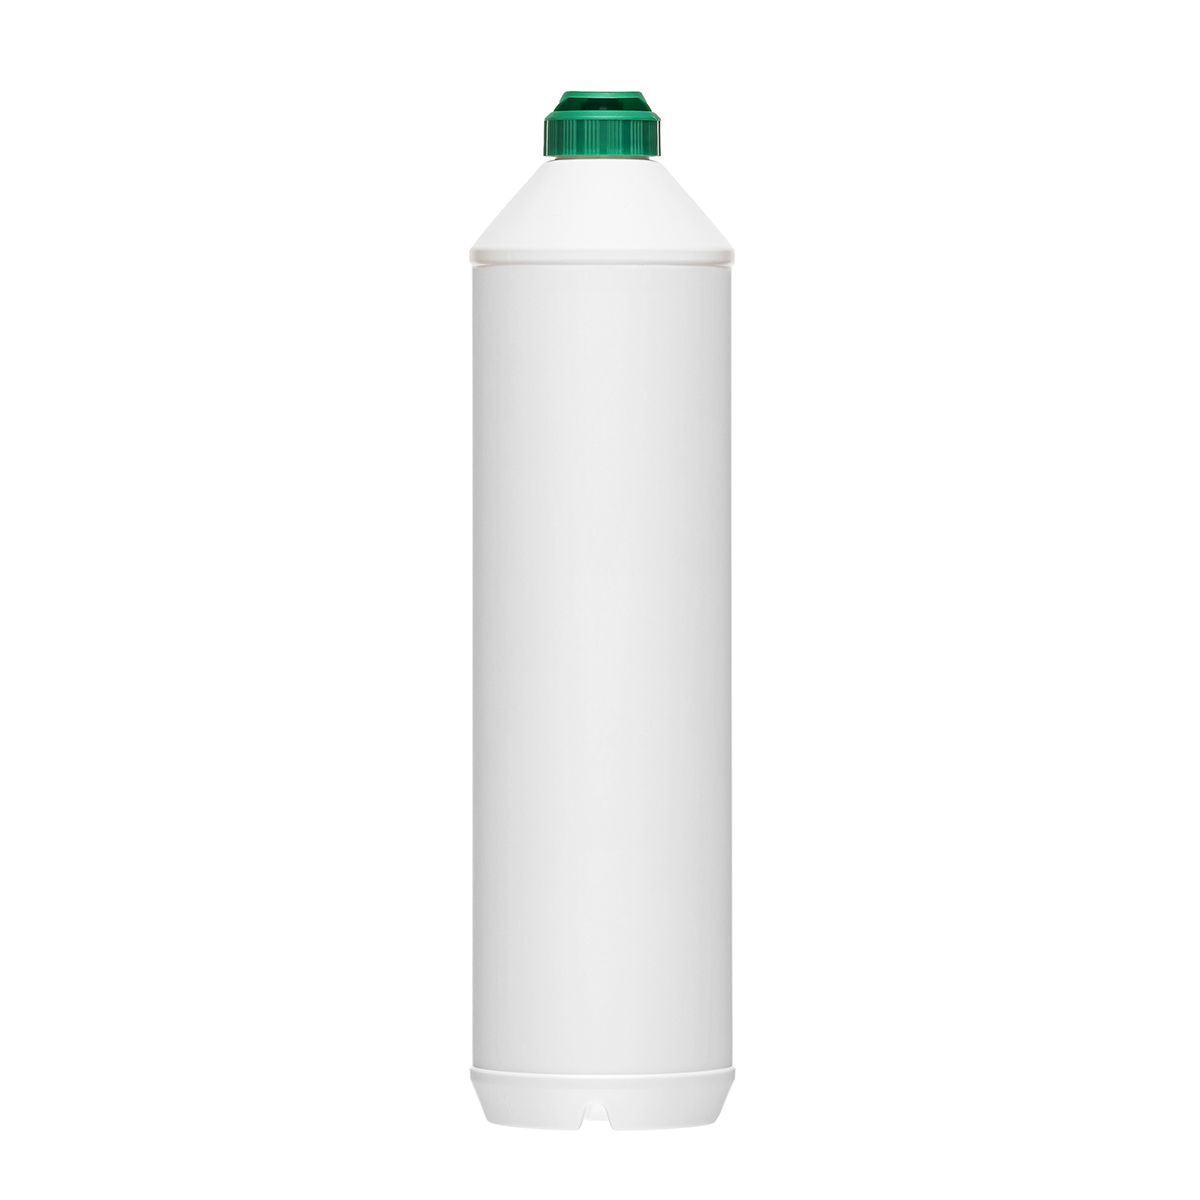 The 800 ml HDPE bottle Max 800 is perfect choice for any product in household chemicals.  This series of bottles is presented in different volumes: 250 ml and 500 ml. by Pack Store Europe, packstore.eu